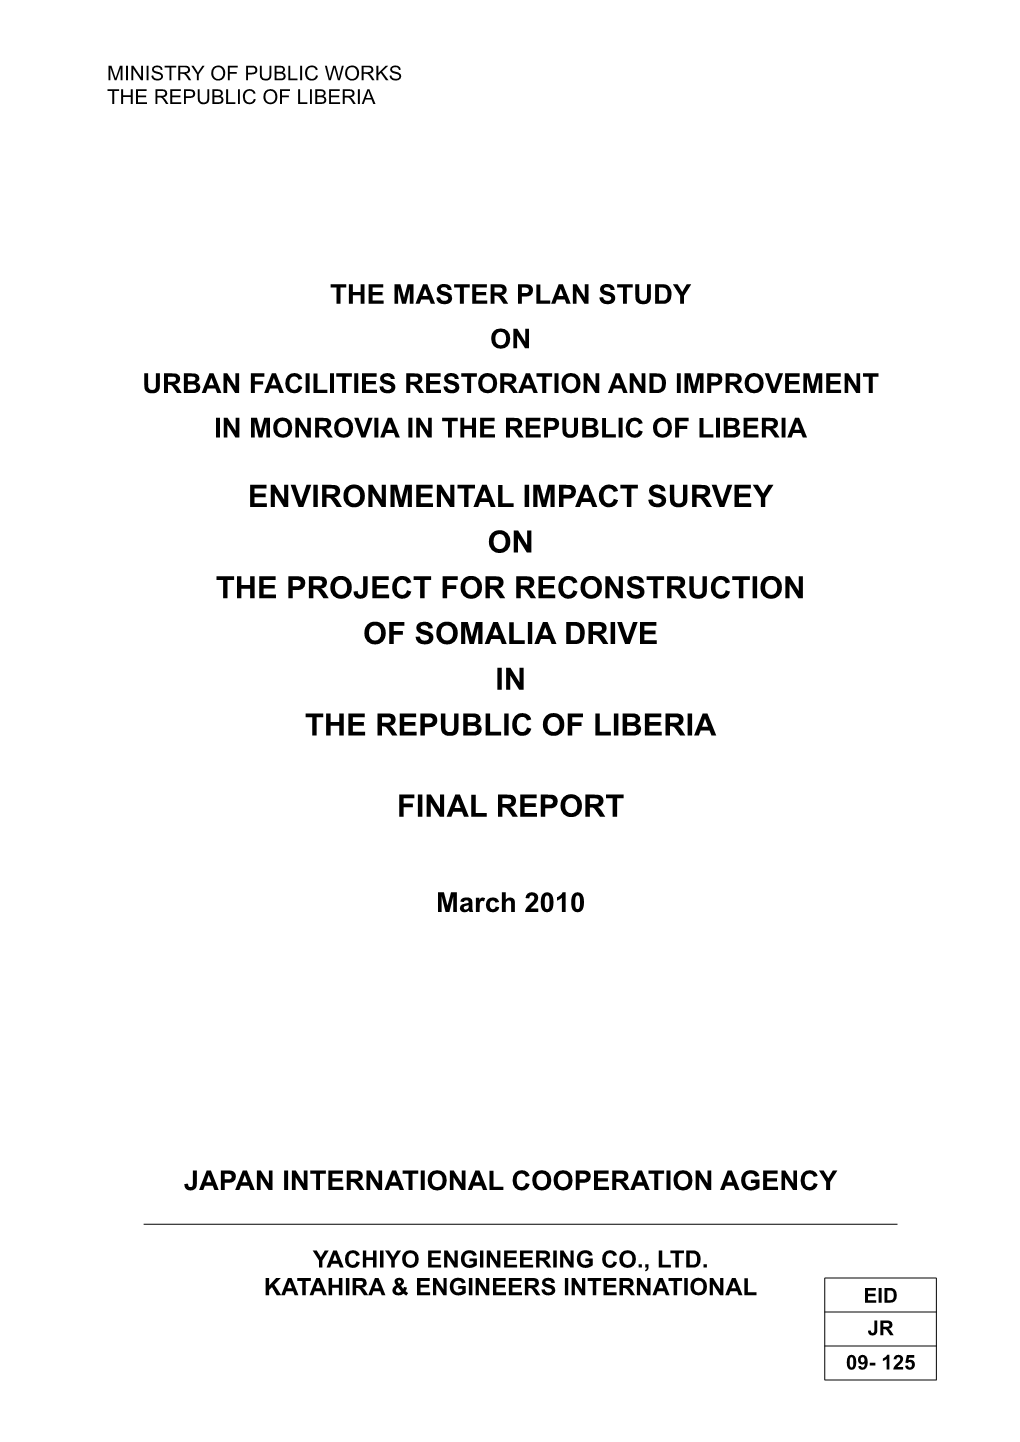 Environmental Impact Survey on the Project for Reconstruction of Somalia Drive in the Republic of Liberia